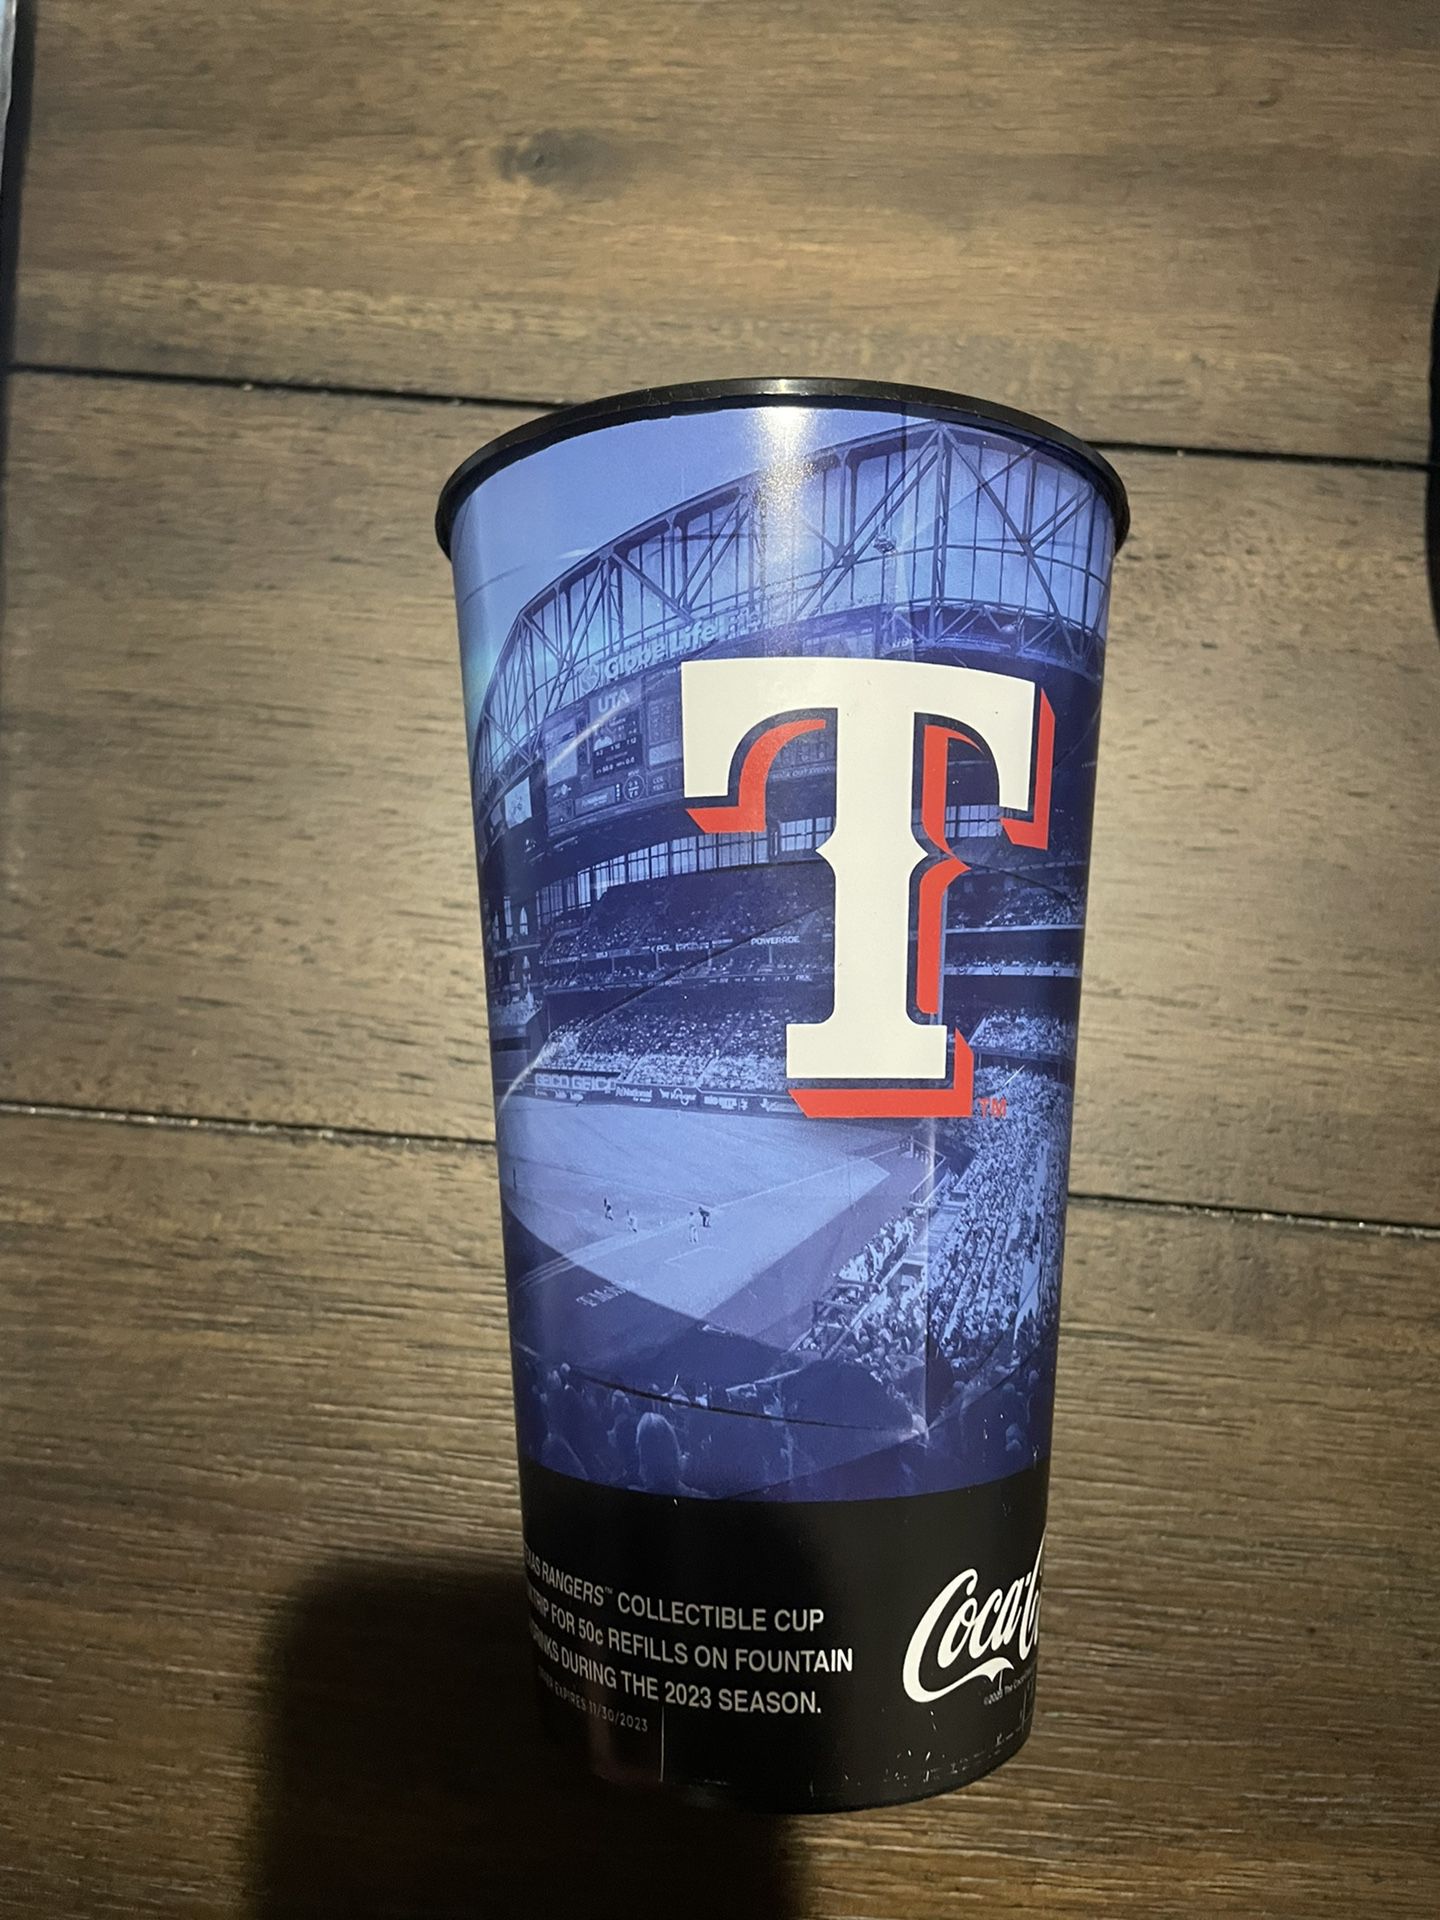 Texas Rangers Opening Week giveaway items Jersey/Souvenir Cup/Souvenir  Popcorn Bowl for Sale in Henderson, NV - OfferUp